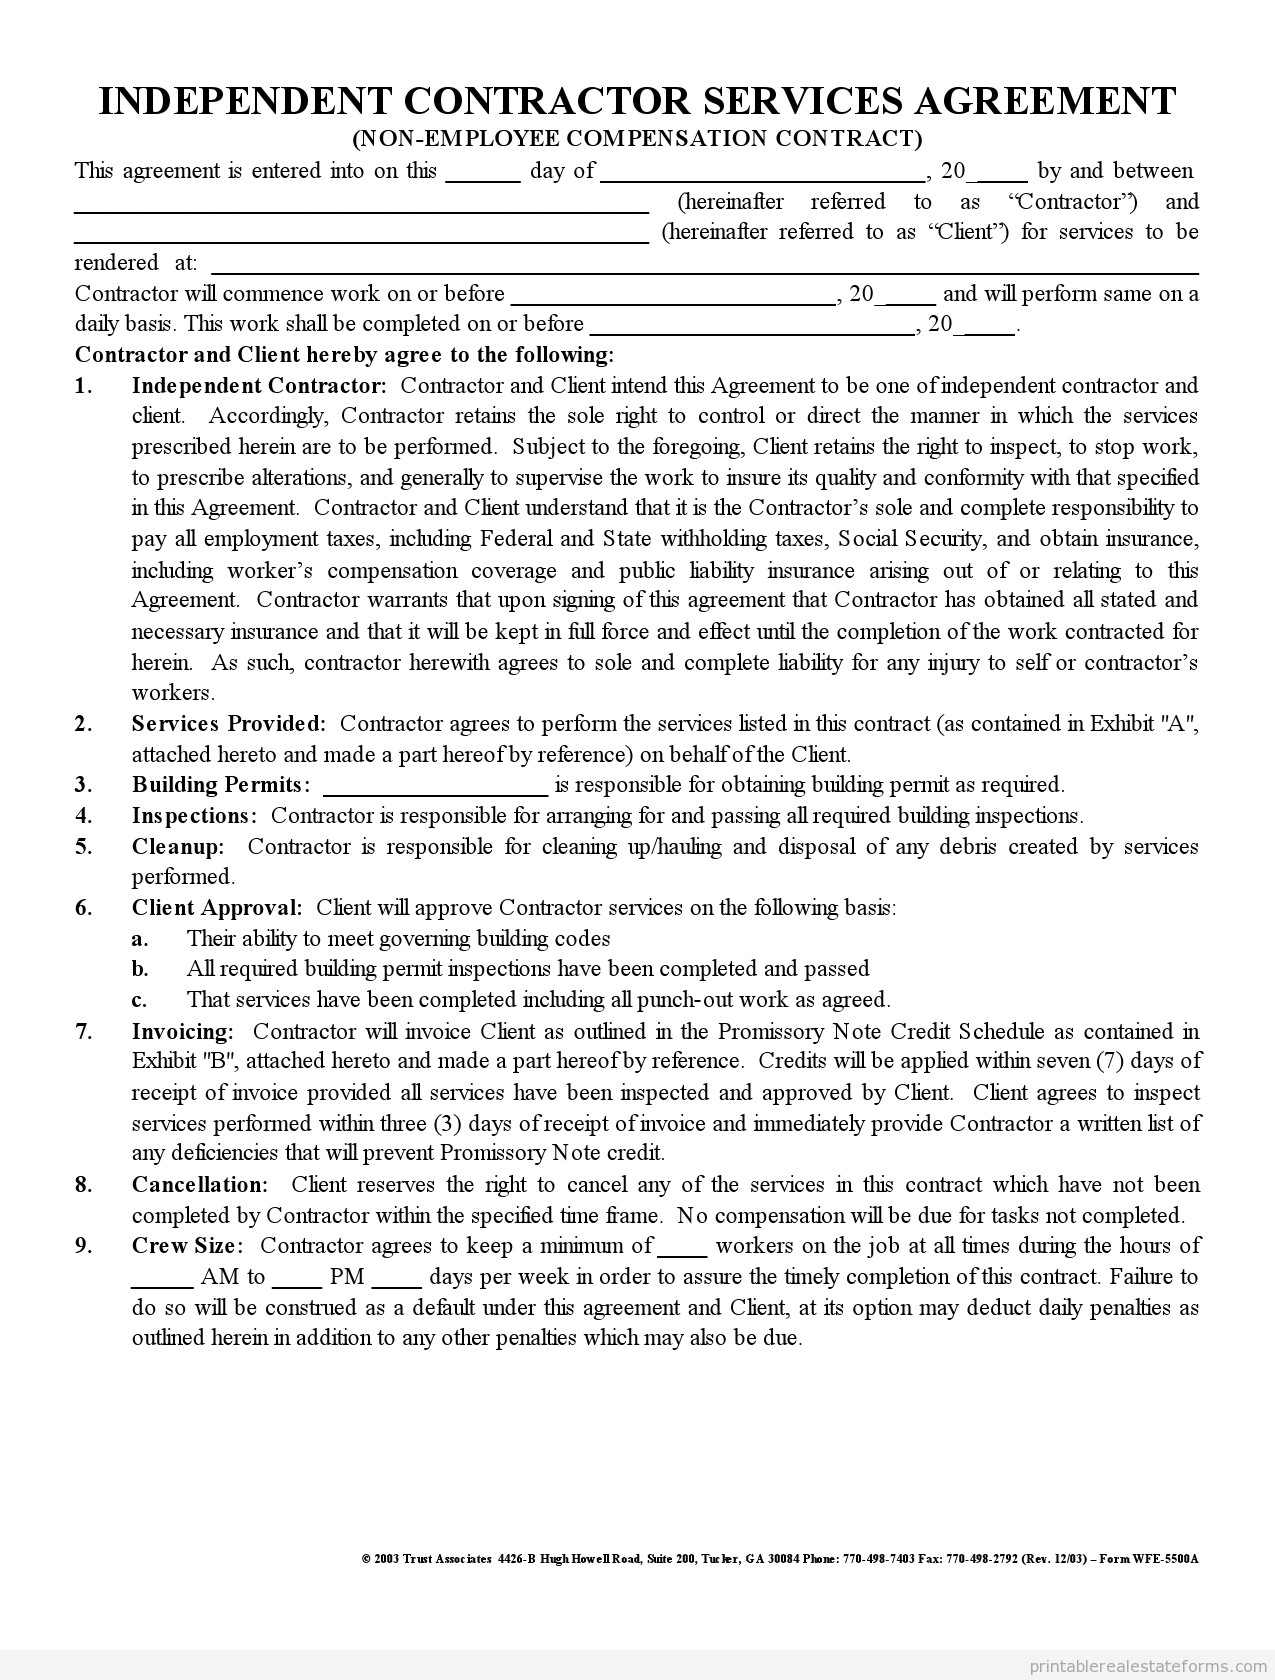 Free Printable Construction Contracts Free Printable Independent Contractor Agreement form